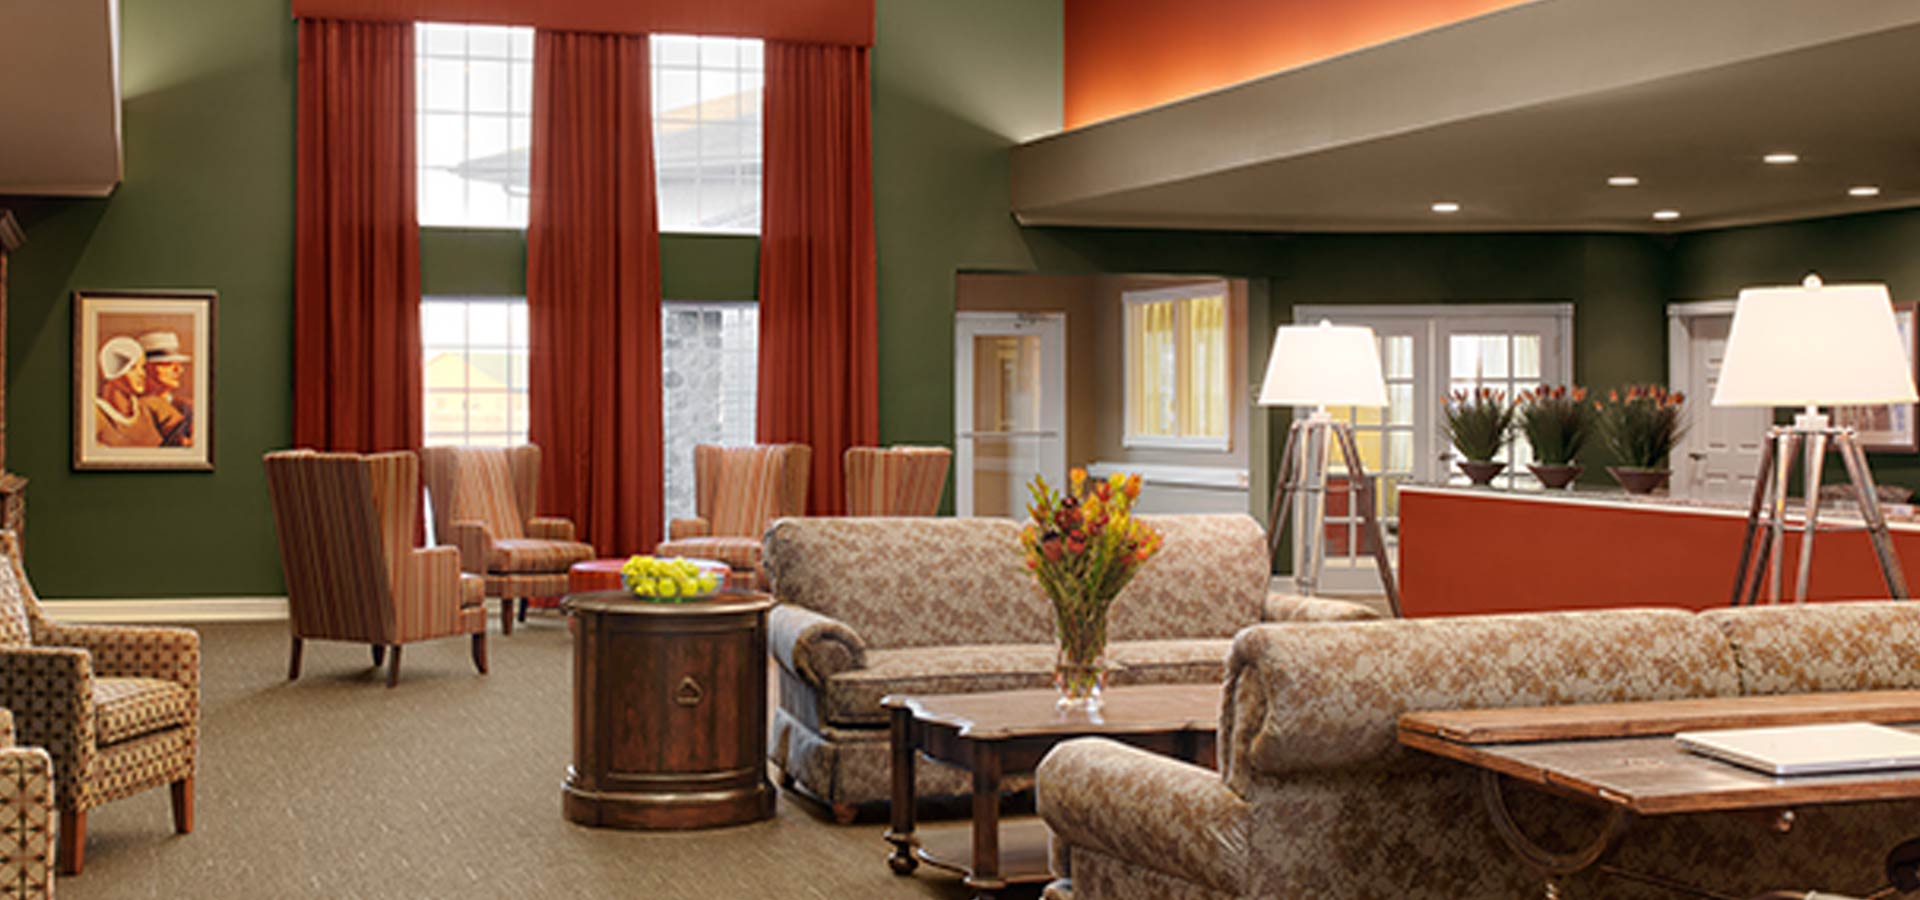 Selecting appropriate Nursing home furniture is a critical